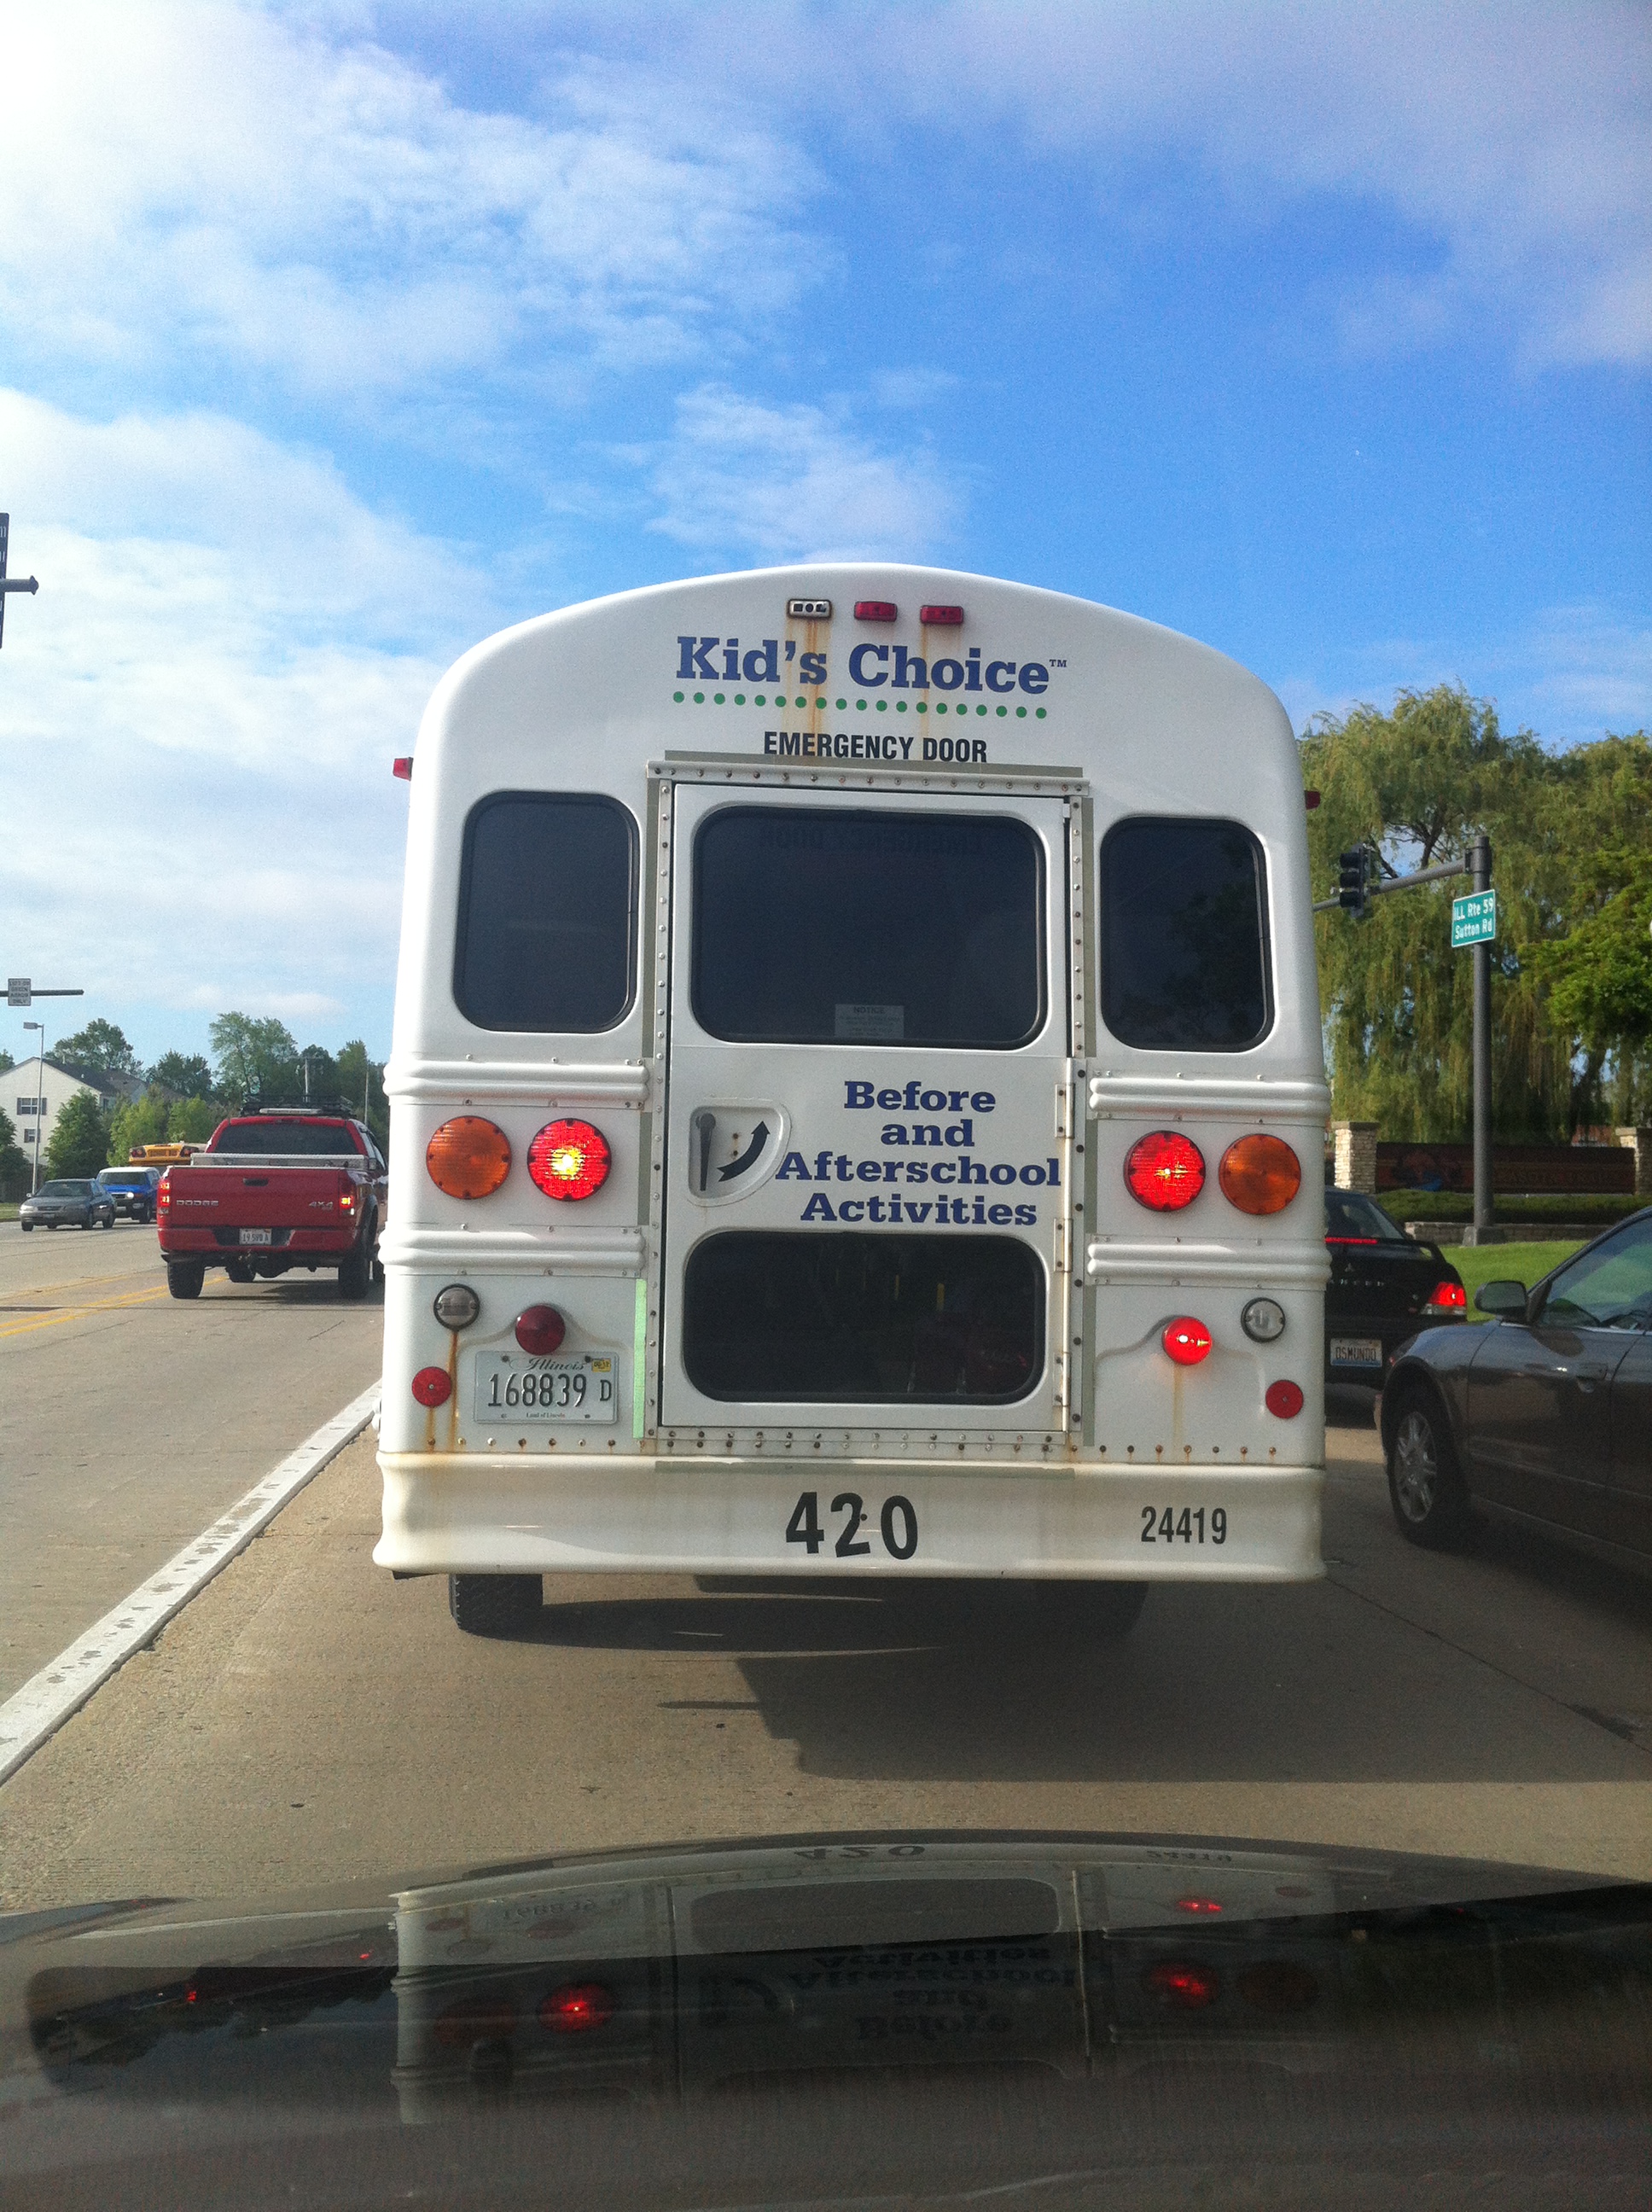 A bus encouraging kids to find interesting things to do before and after school